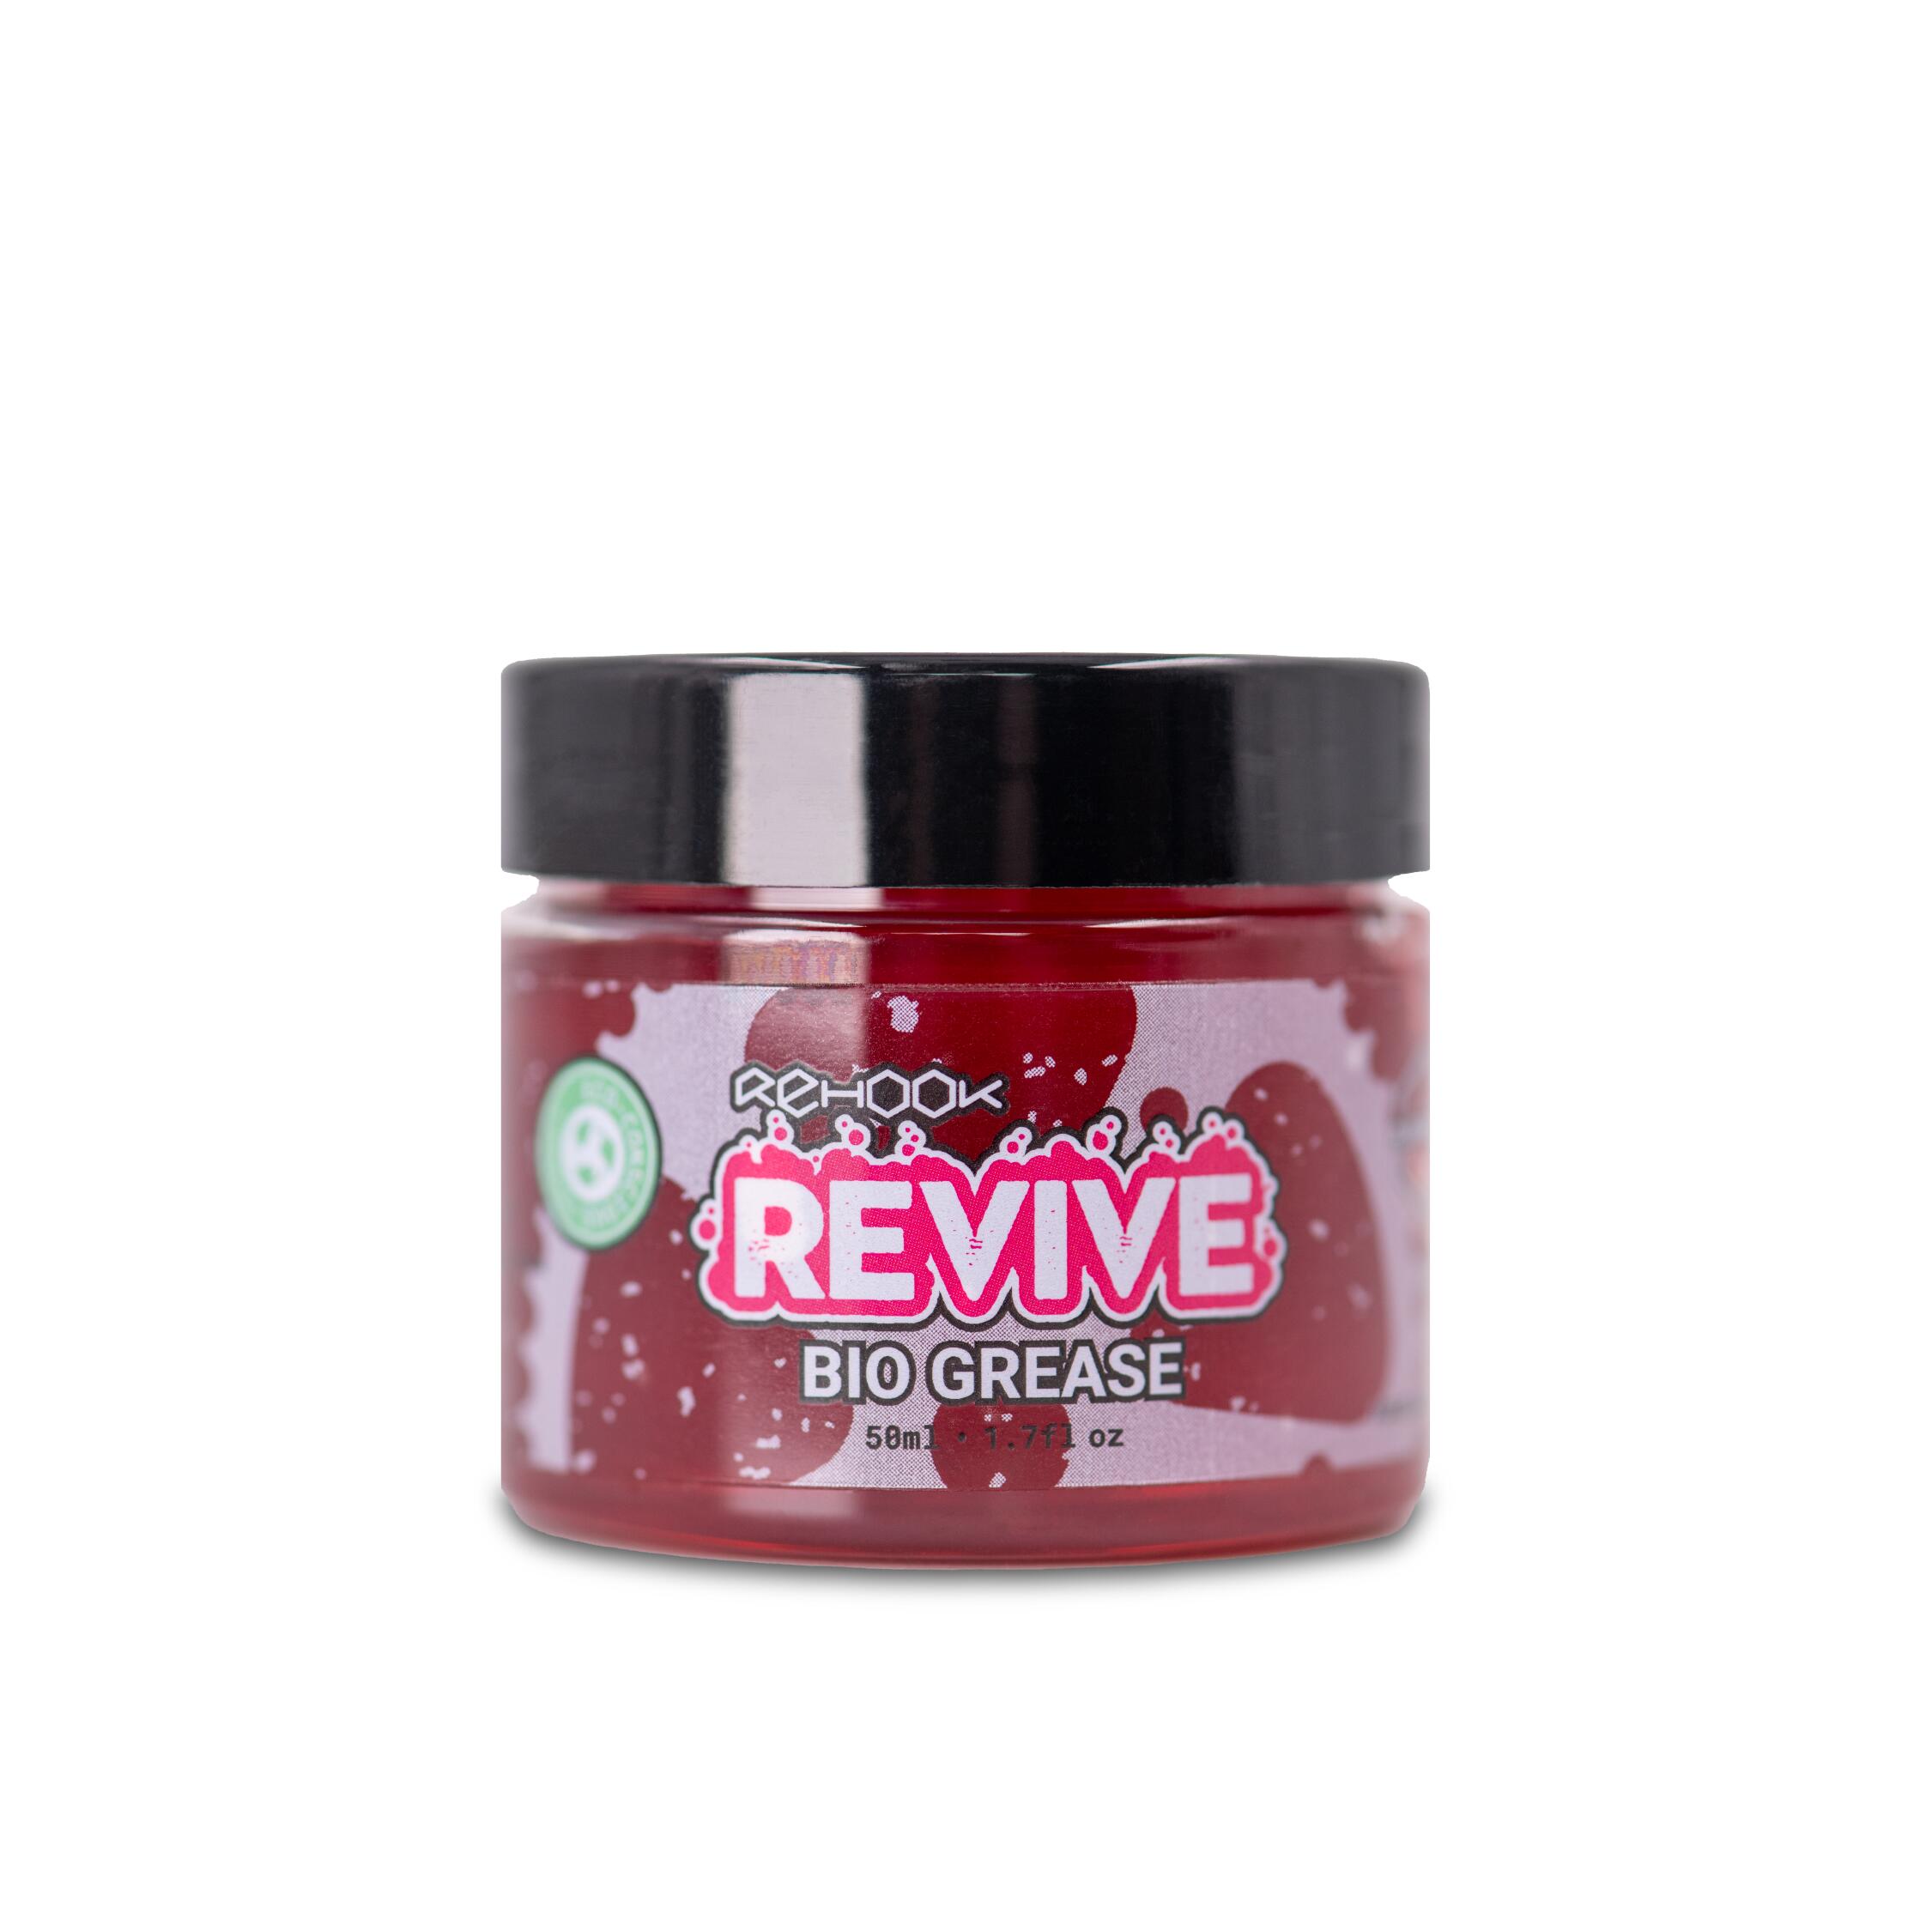 REHOOK Revive Bio Grease - Plant-Based, Biodegradable, High Performance